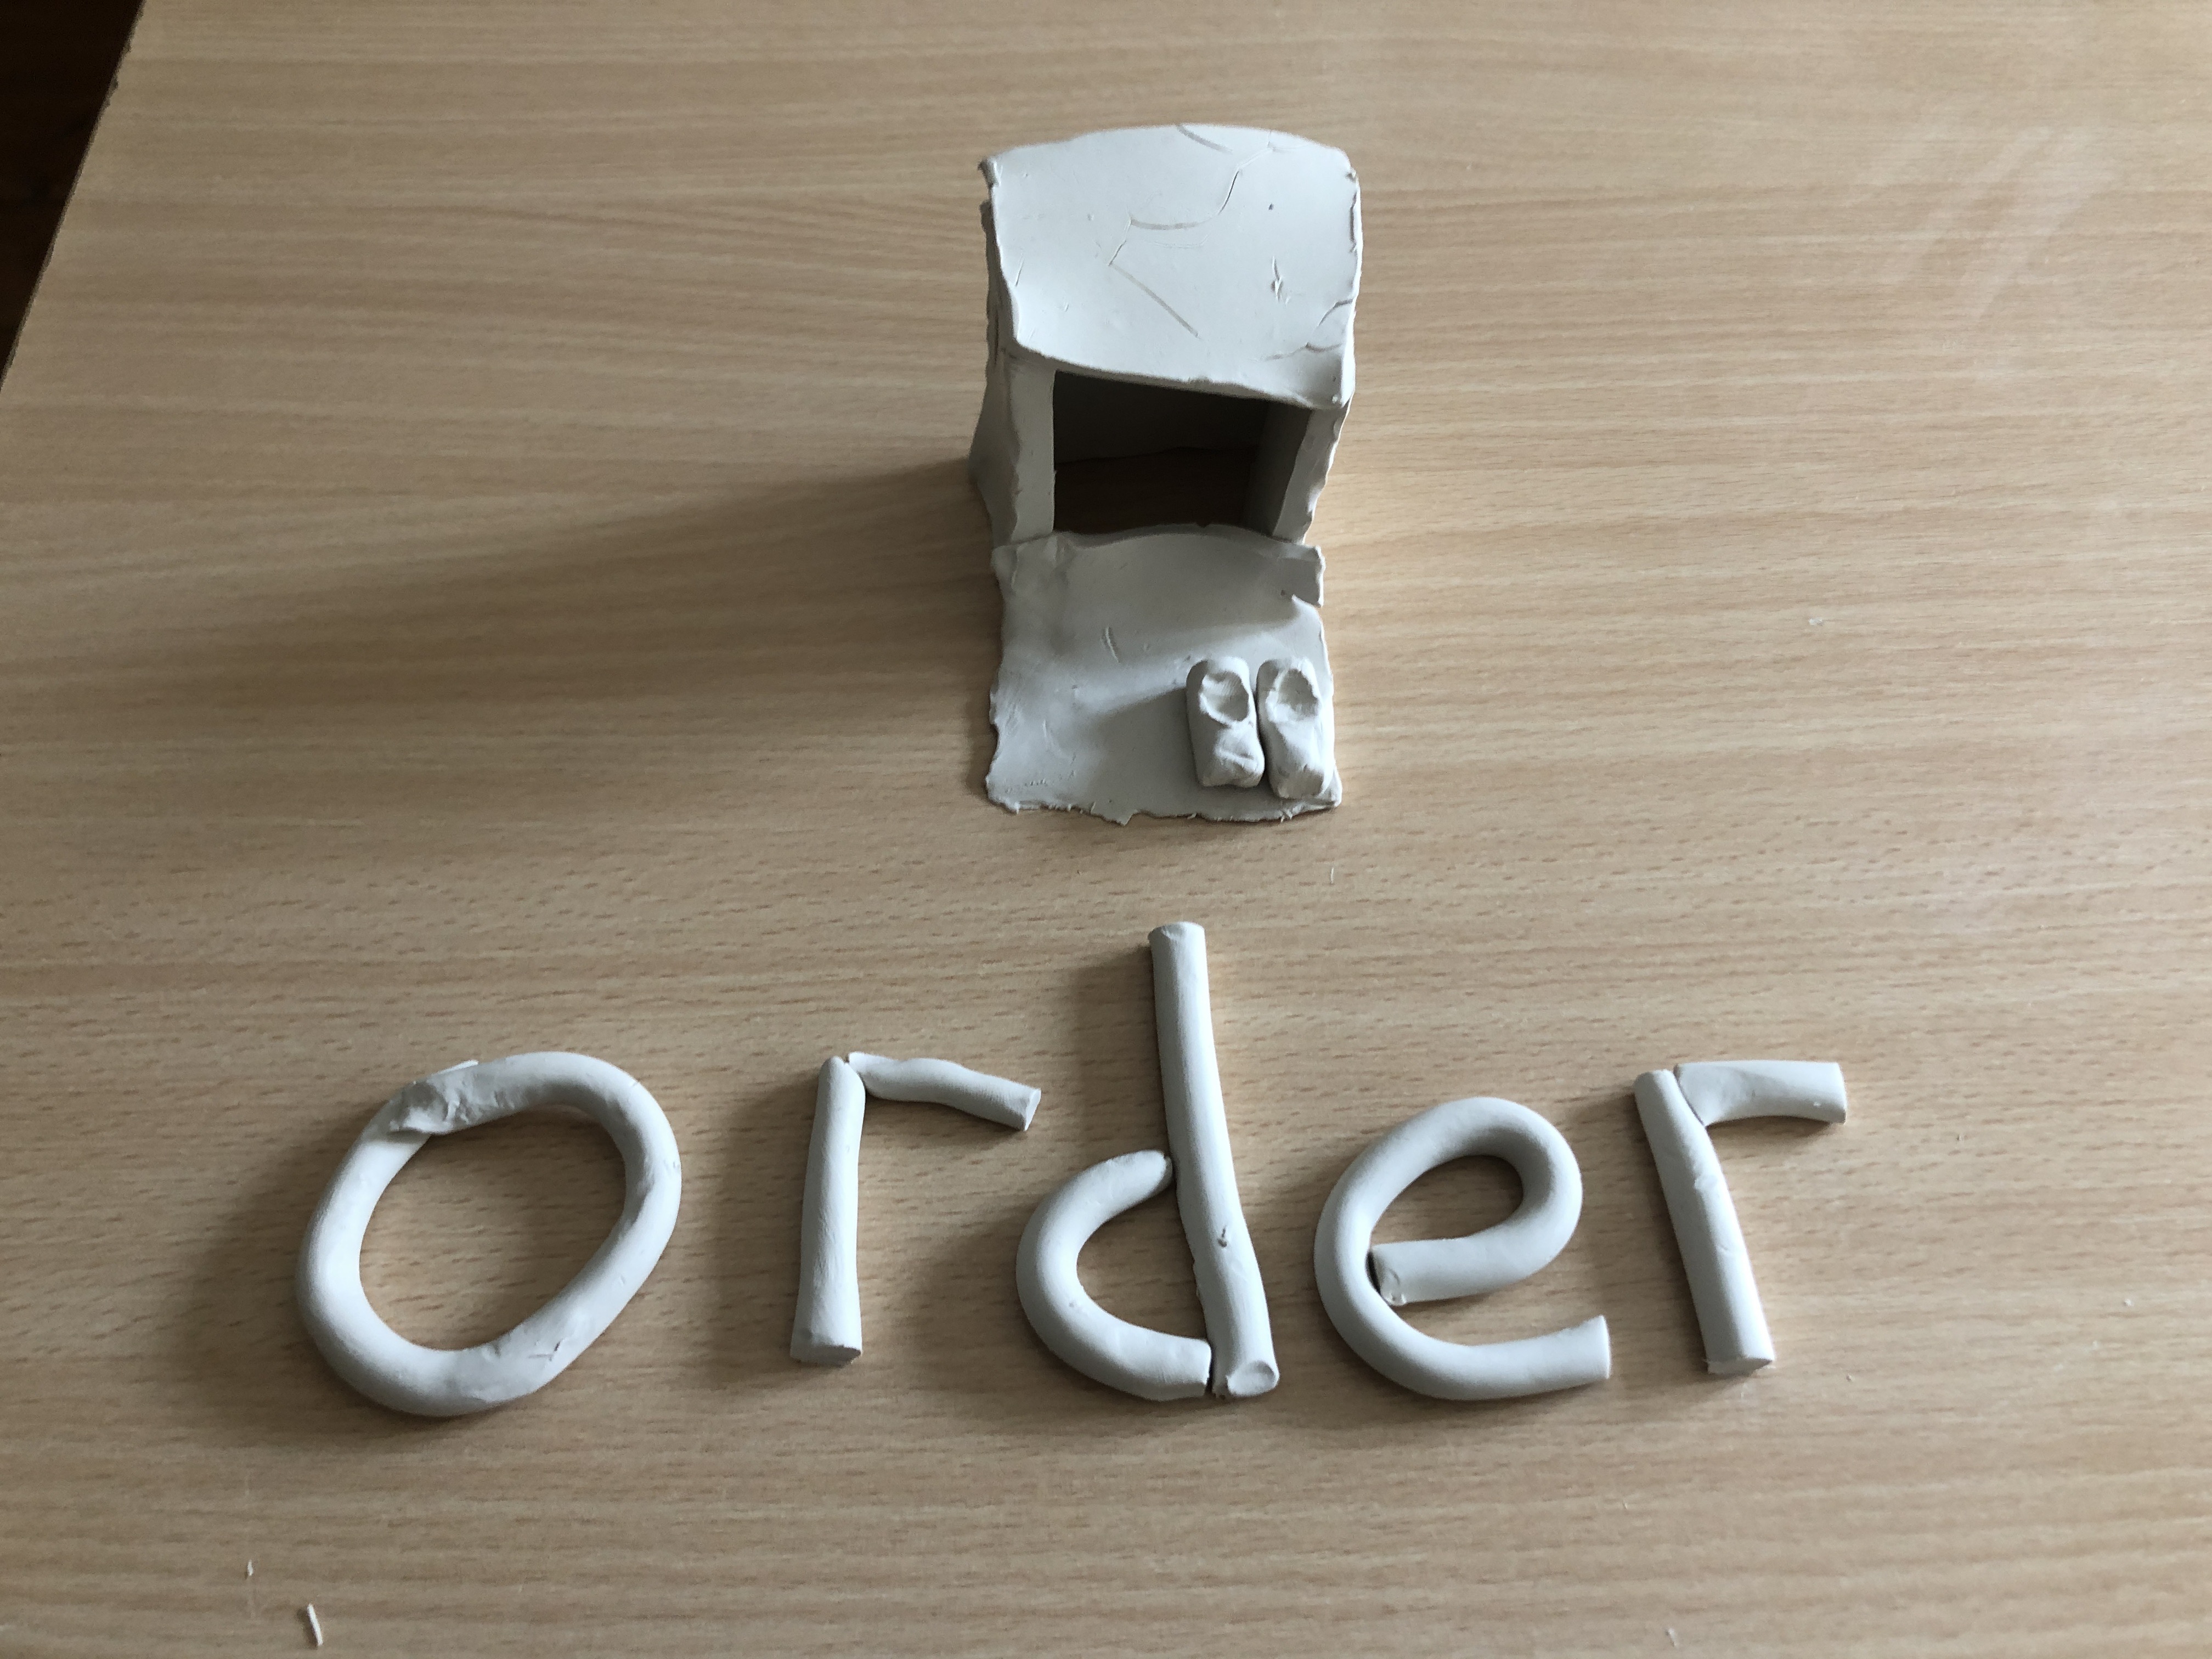 Order is when things are in their proper place, proper condition and proper position.